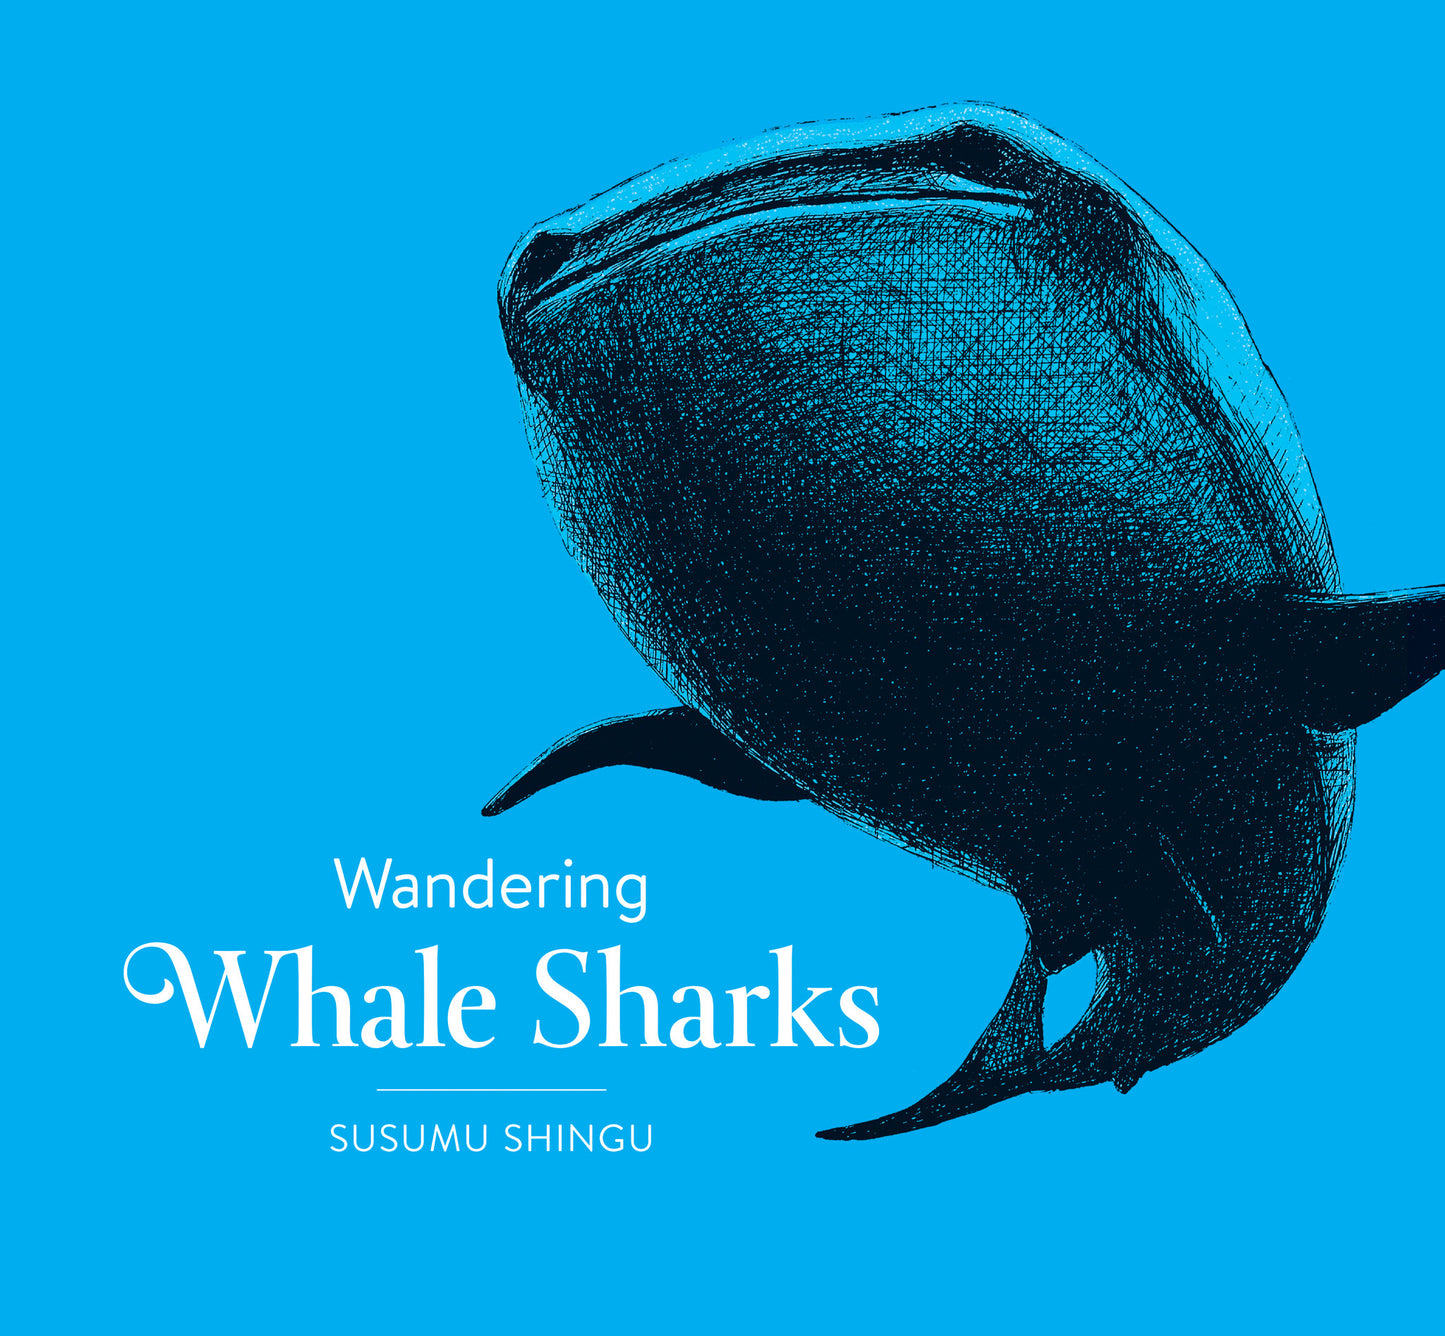 Wandering Whale Sharks - Owlkids - Reading for kids and literacy resources for parents made fun. Books helping kids to learn.